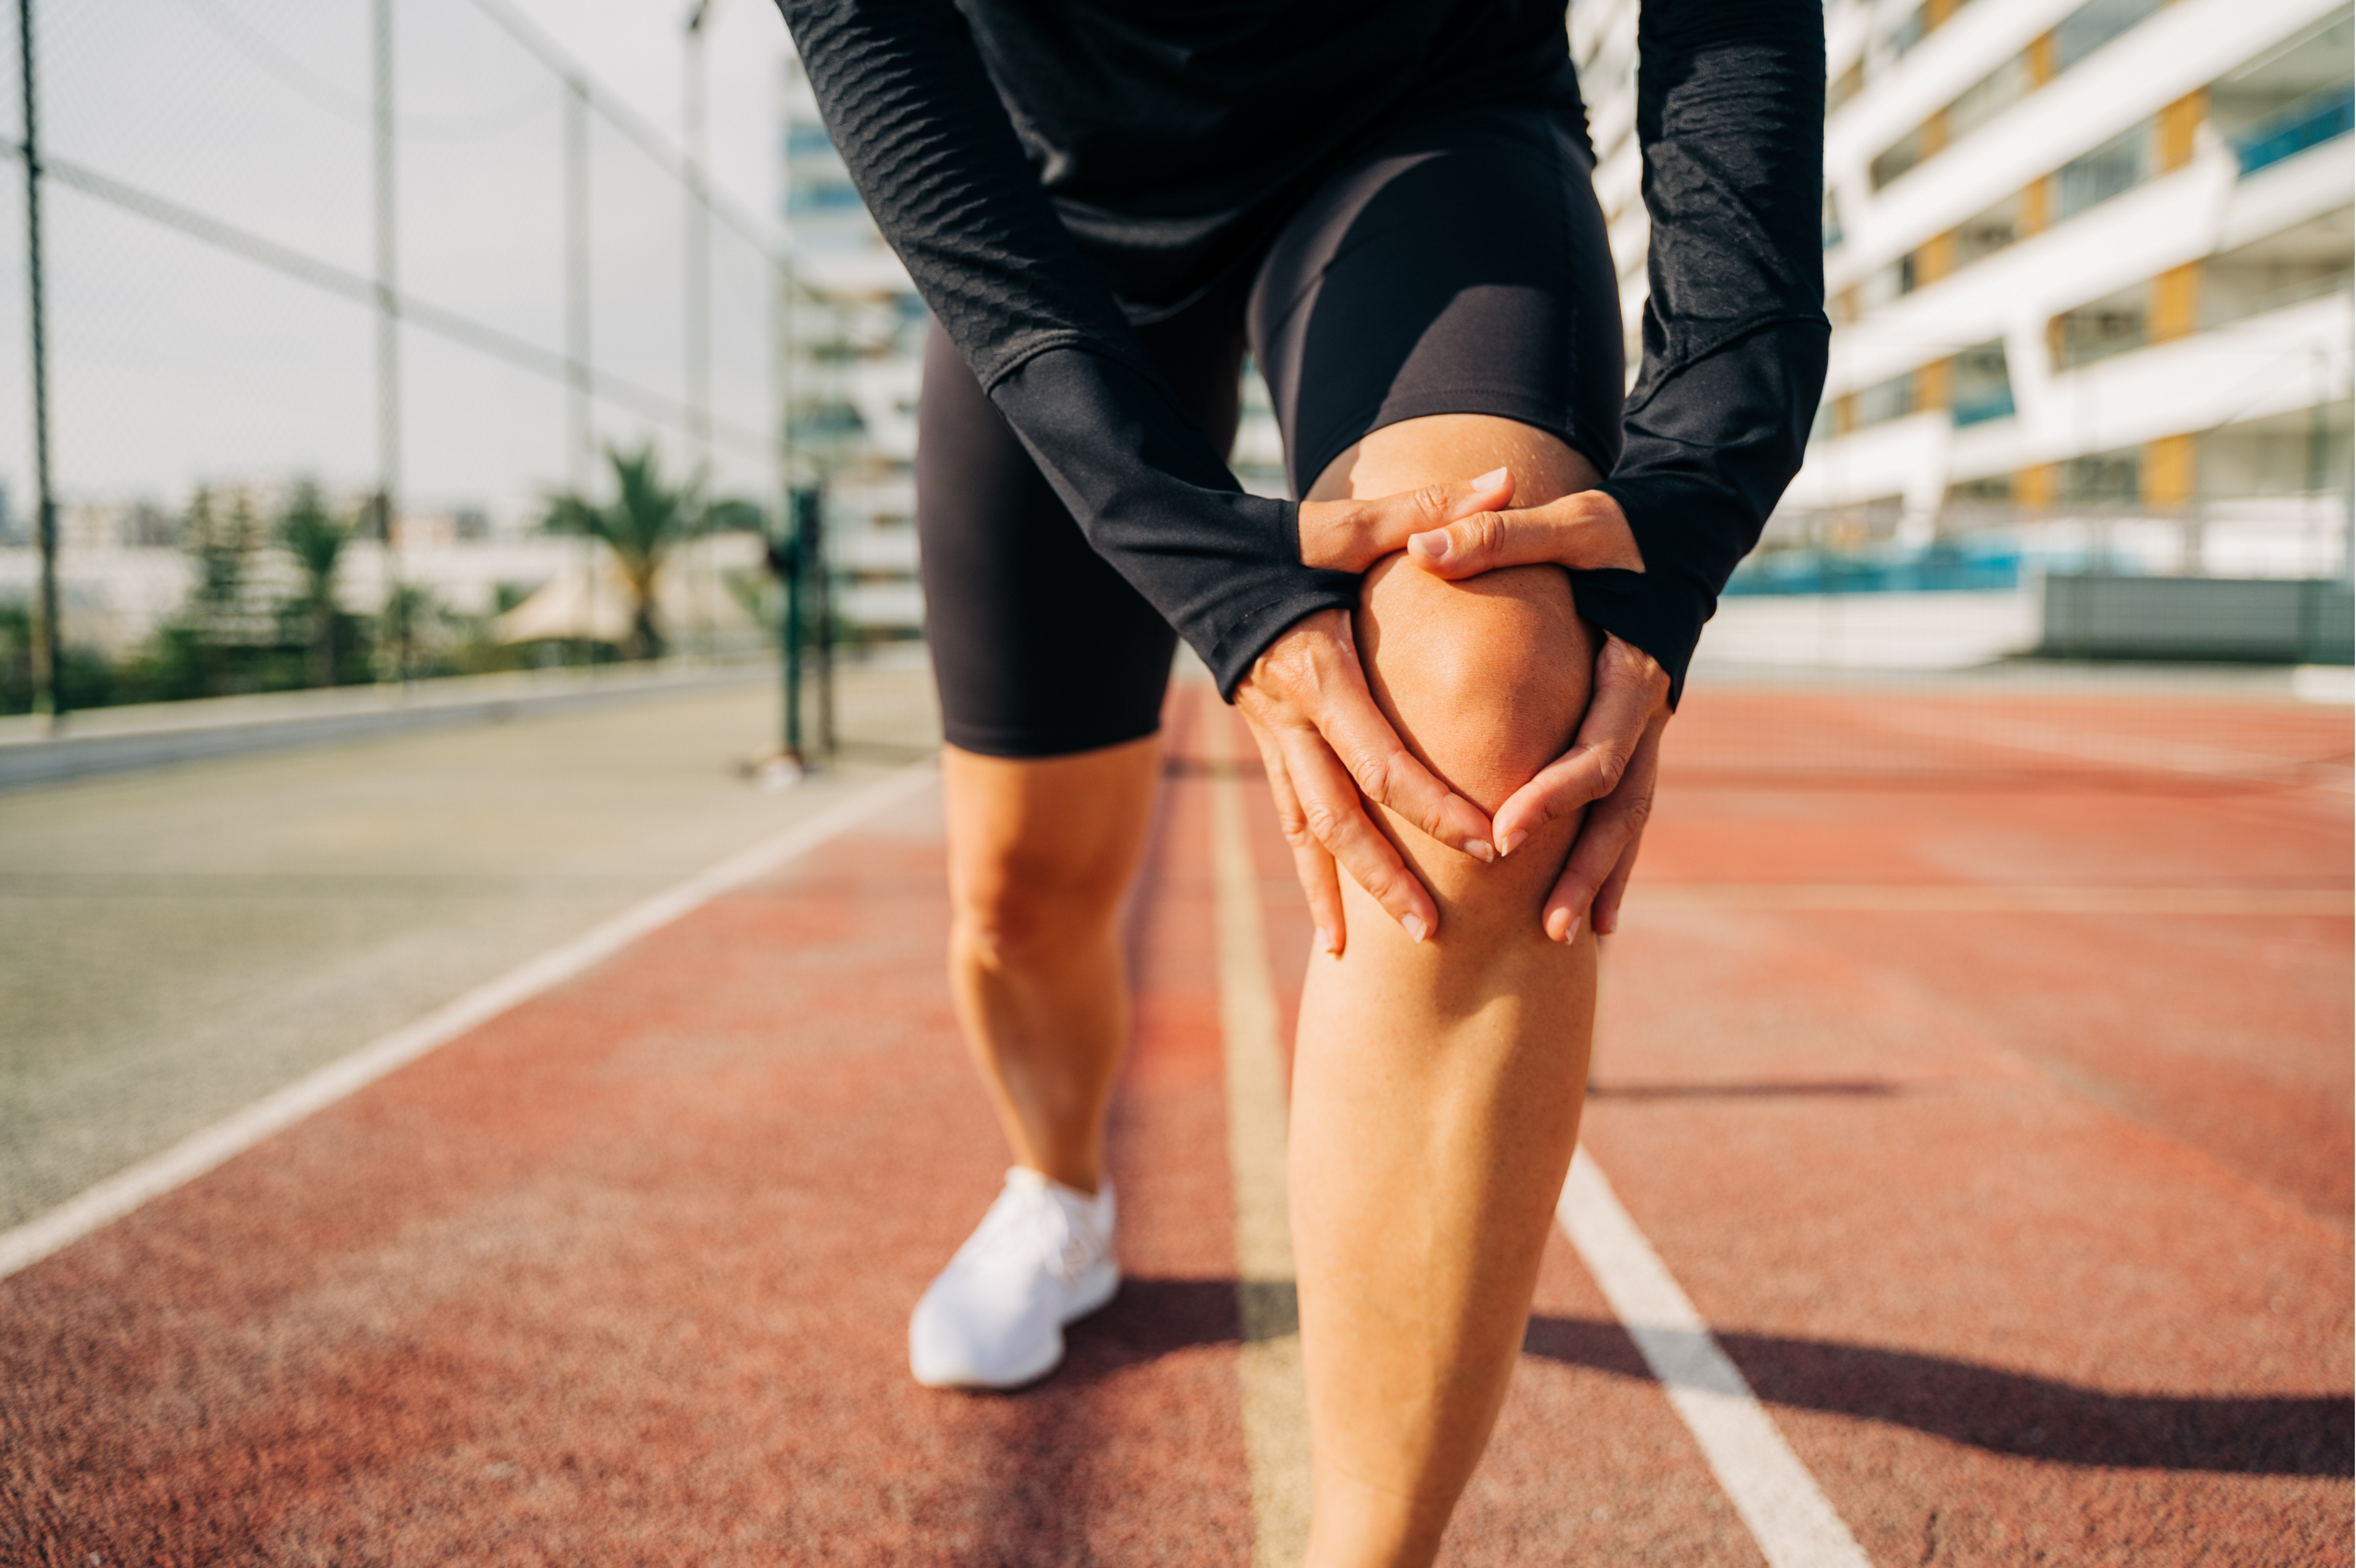 A runner with quadriceps tendonitis doing exercises and wondering what to avoid.